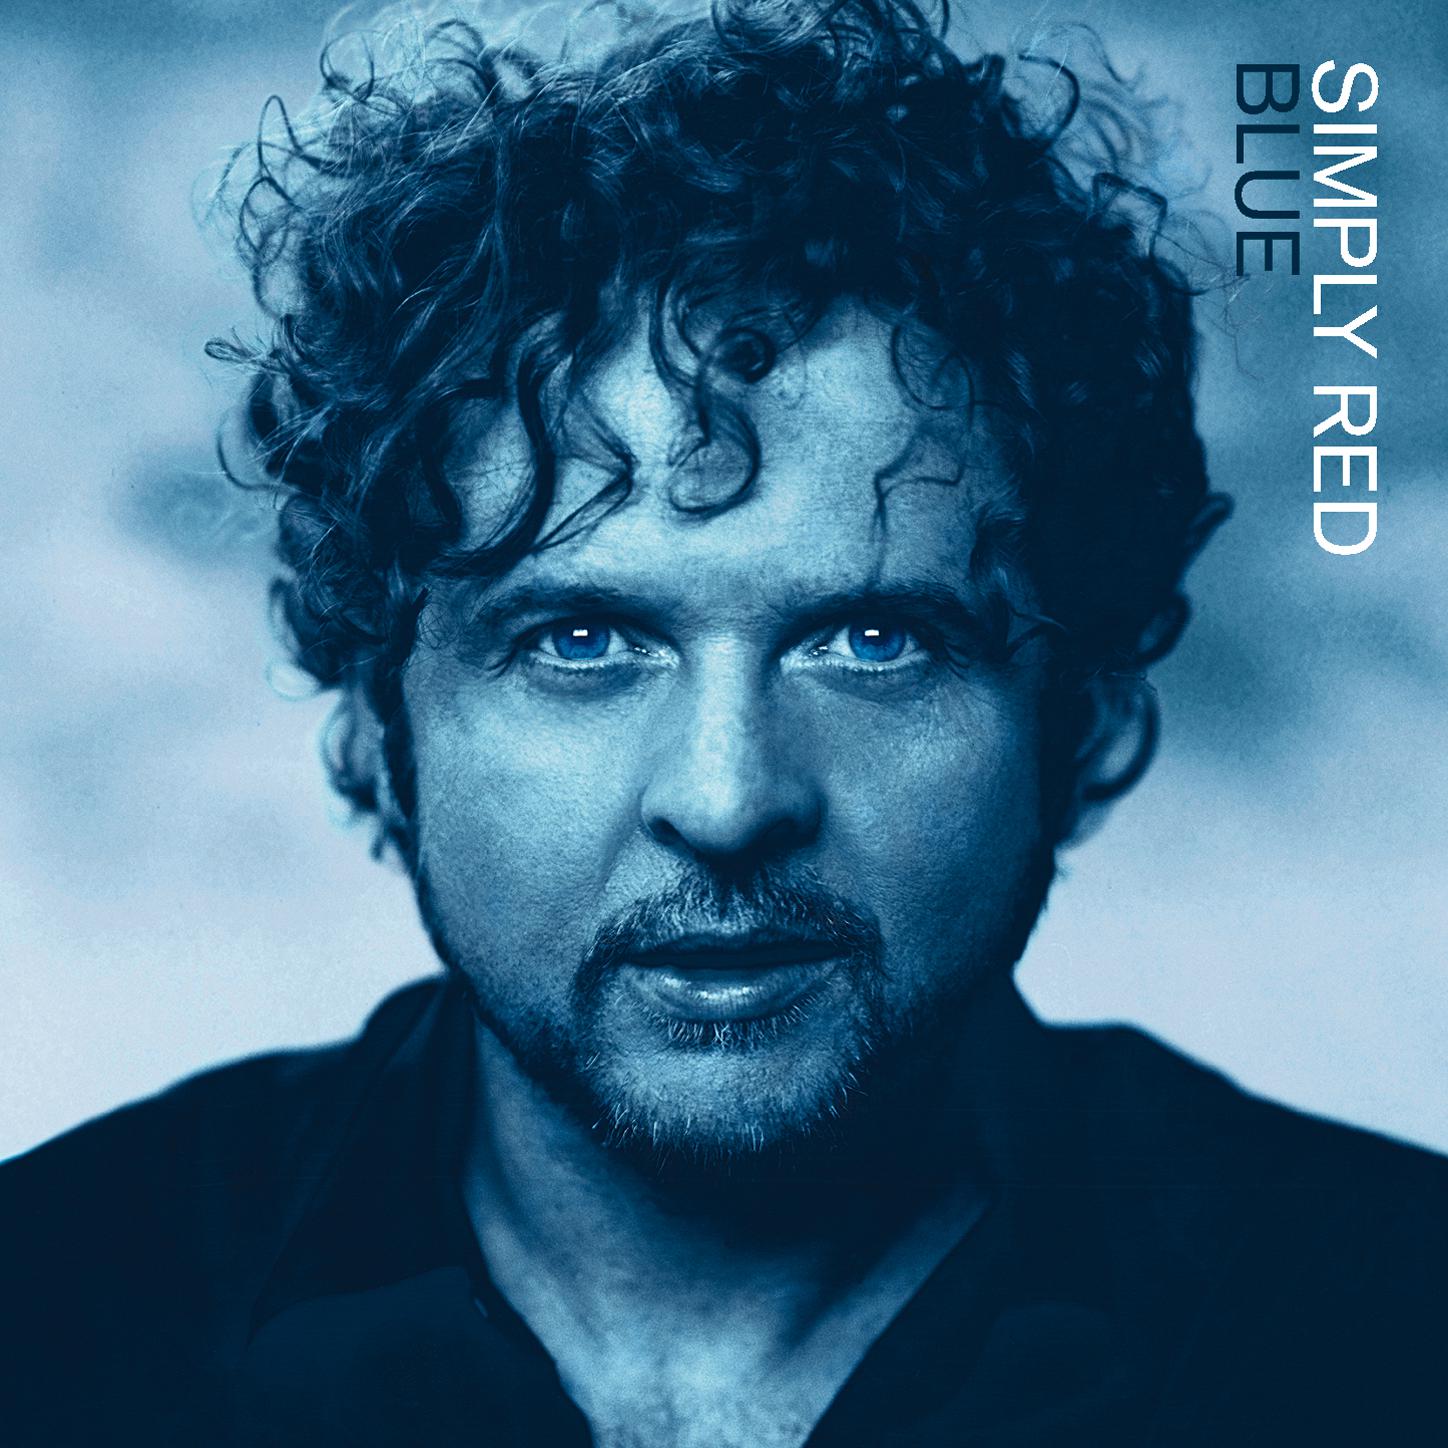 Simply Red - To Be Free (Livin' Joy A-Hanetta Mix)